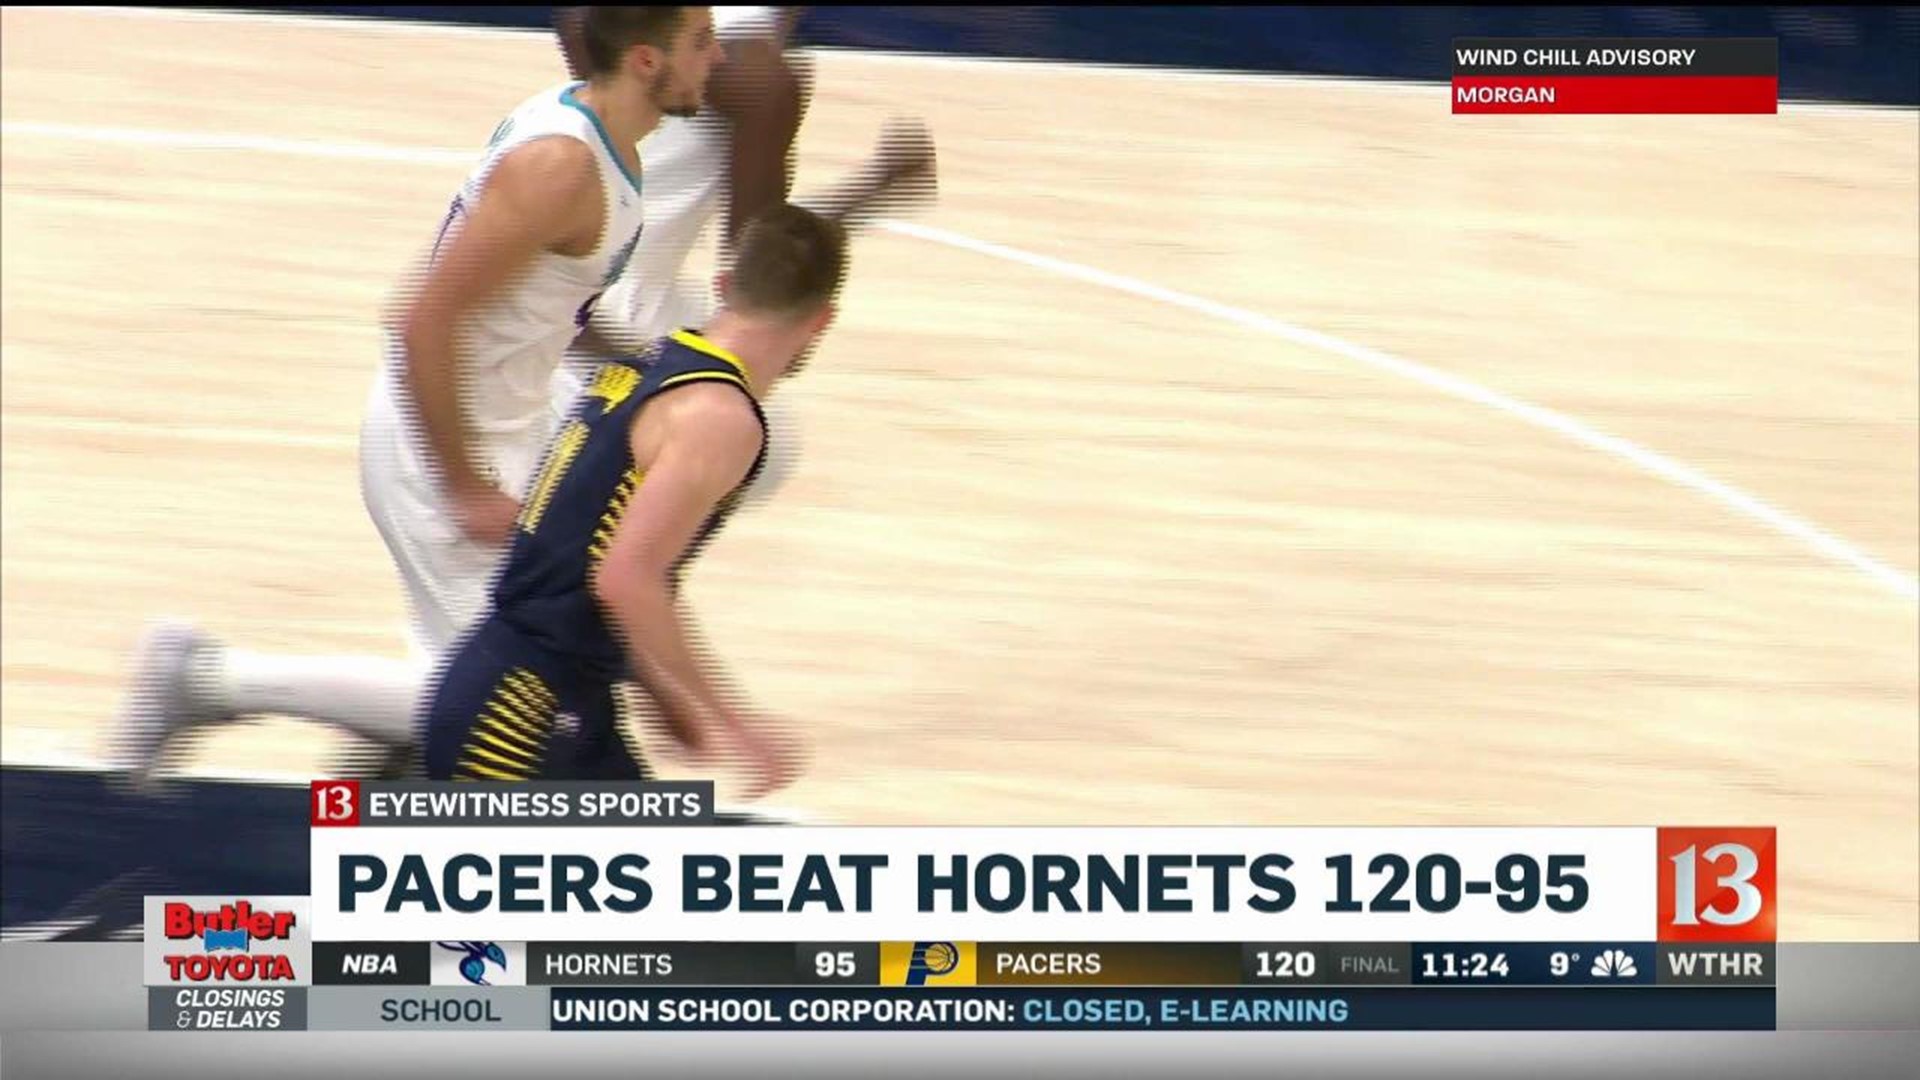 Pacers beat Hornets 120-95